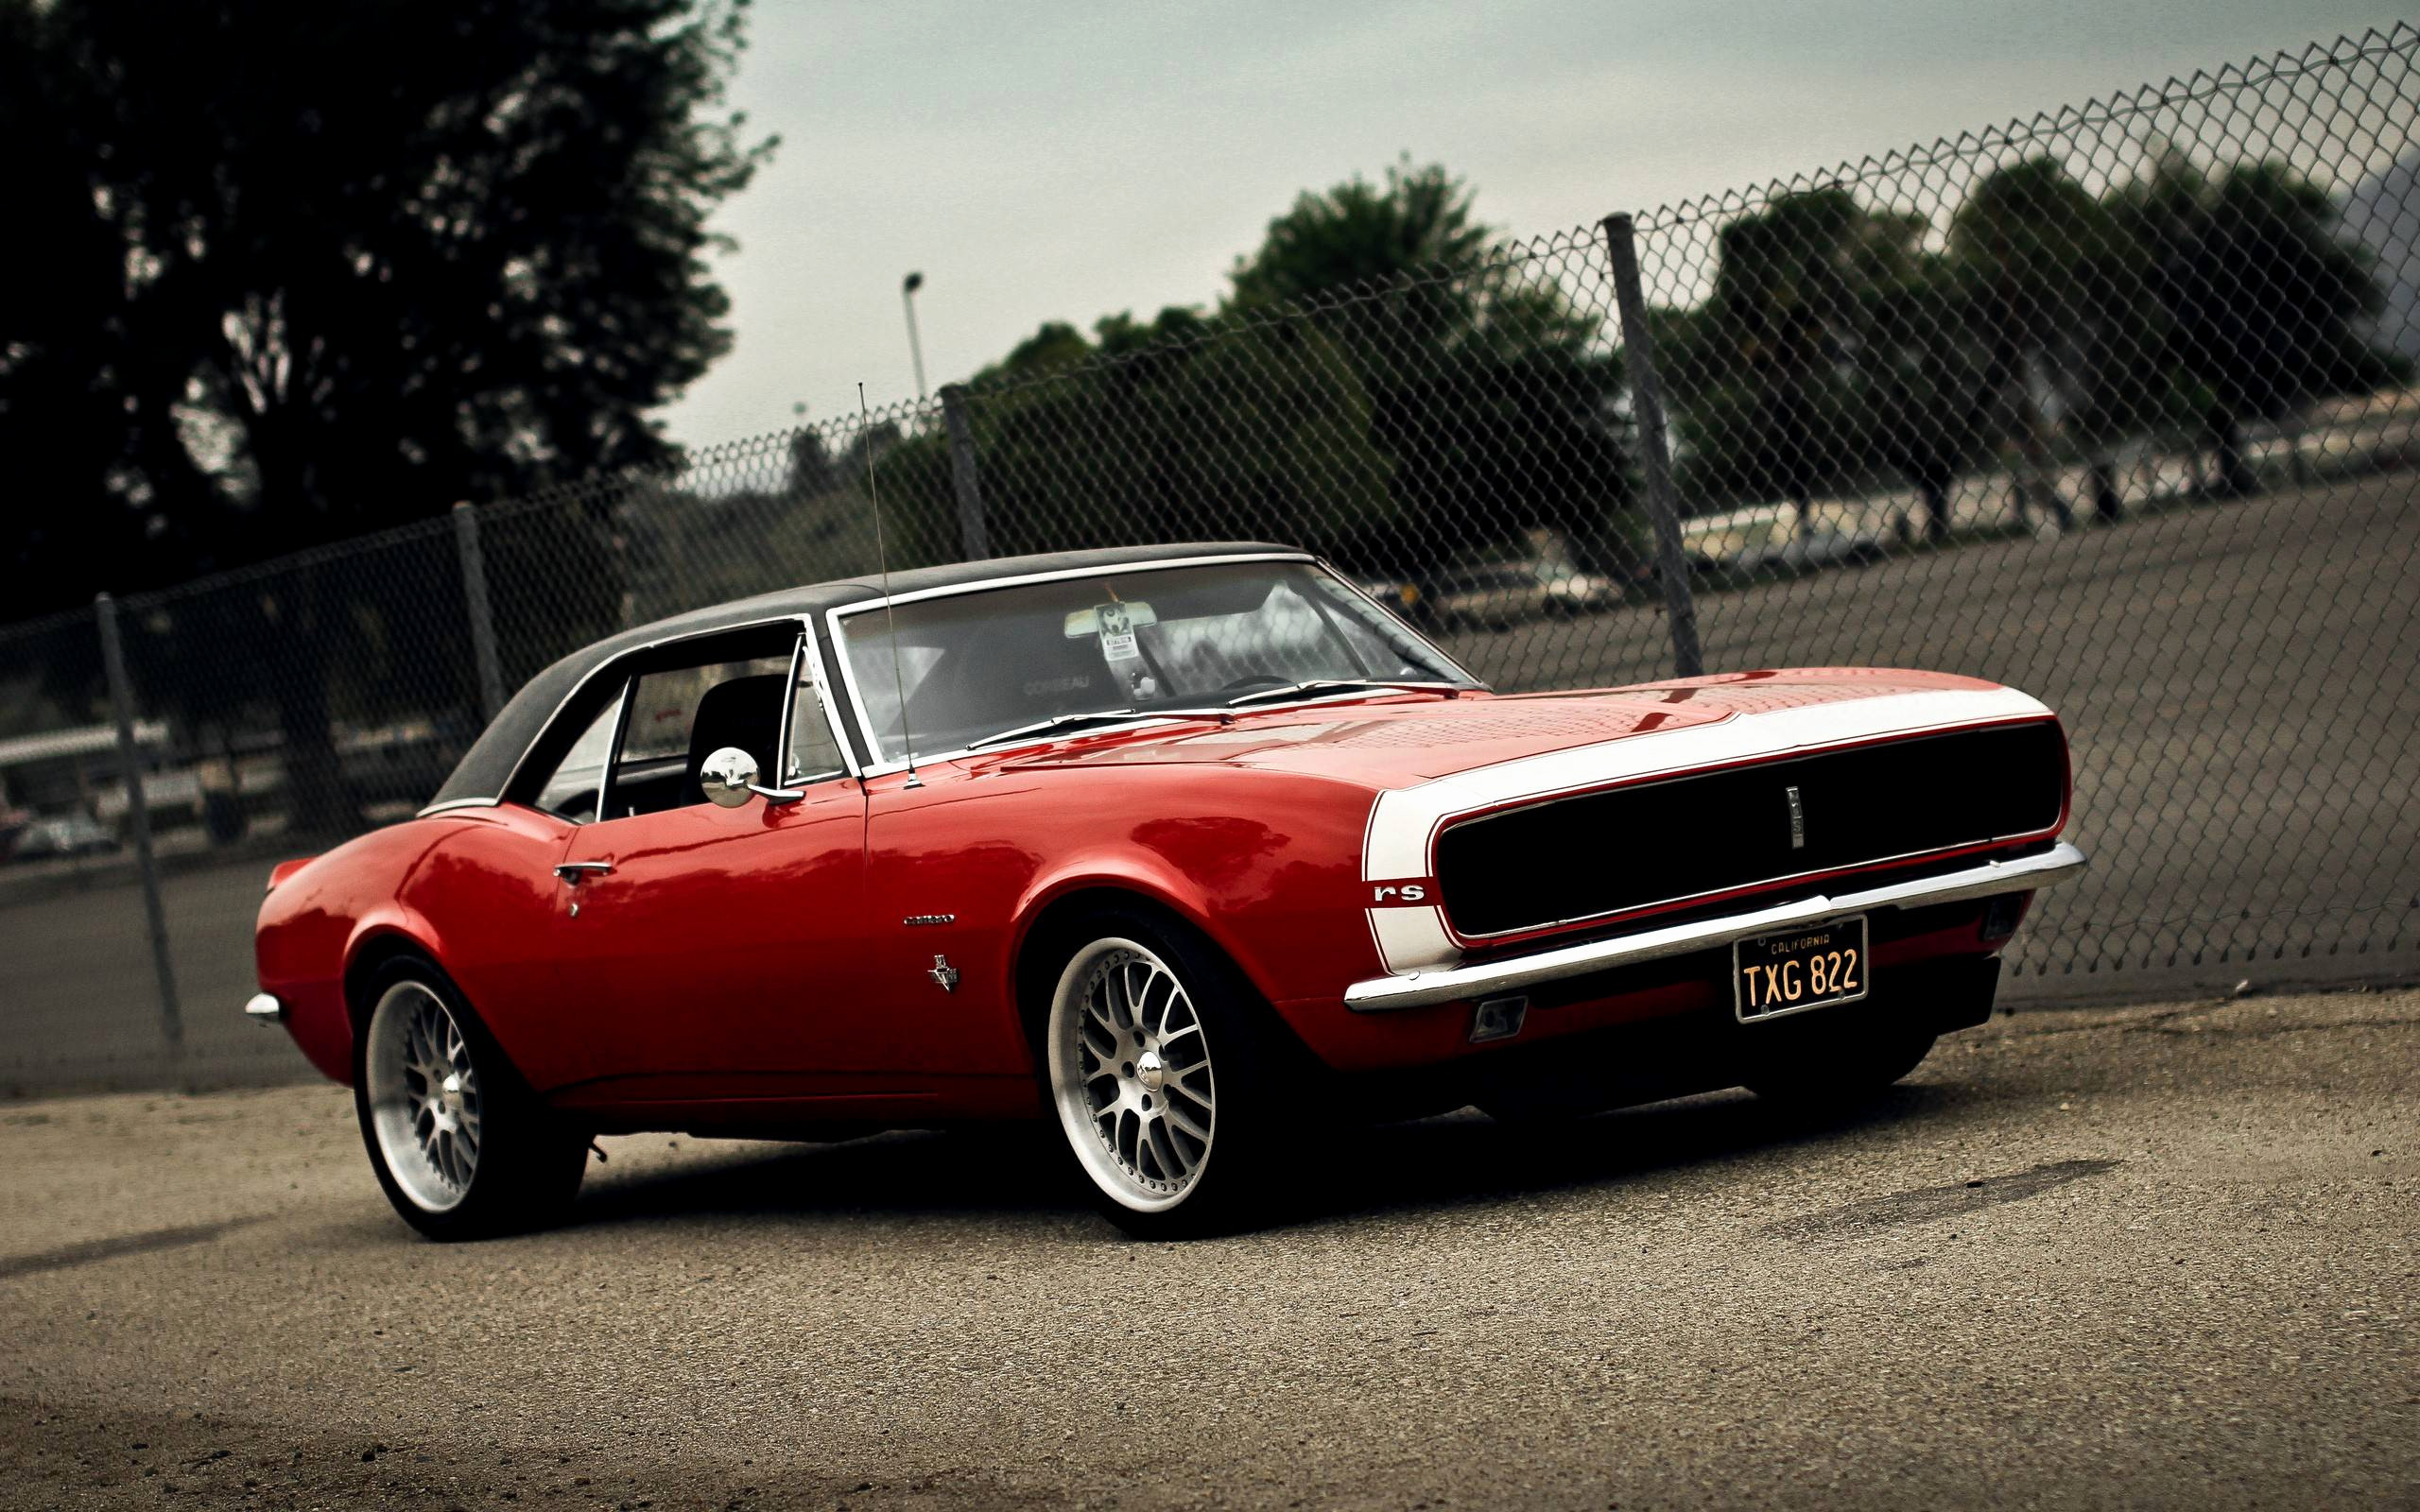 2560x1600 Cool Muscle Cars Wallpaper Awesome Free Muscle Car Wallpapers 1366Ã768 65  63 Kb